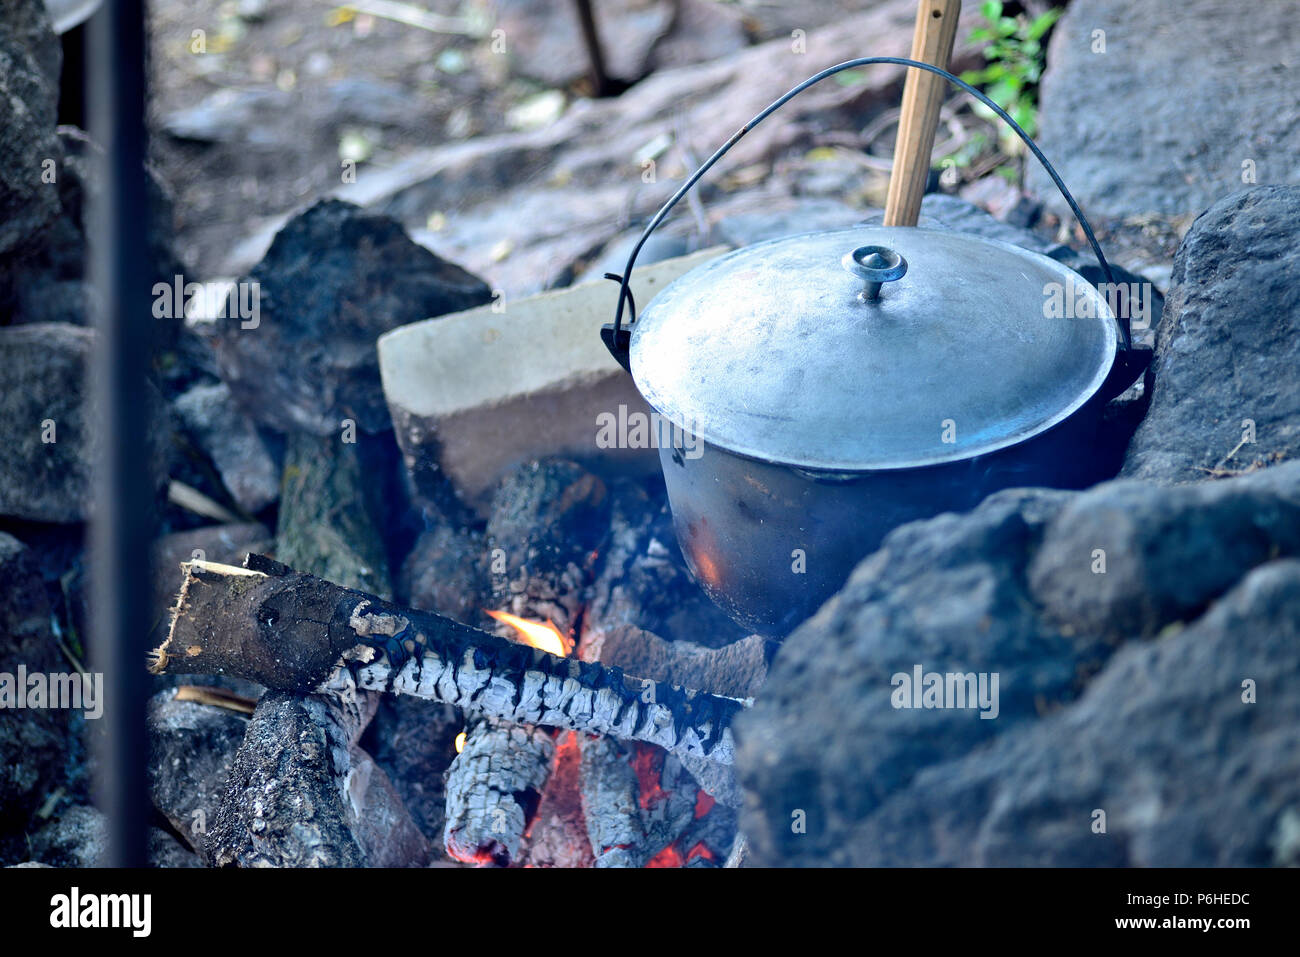 https://c8.alamy.com/comp/P6HEDC/cooking-in-a-cauldron-on-an-open-fire-preparing-food-at-the-stake-in-a-wild-camping-to-cook-dinner-in-a-pot-on-fire-to-eat-outdoors-in-the-camping-P6HEDC.jpg